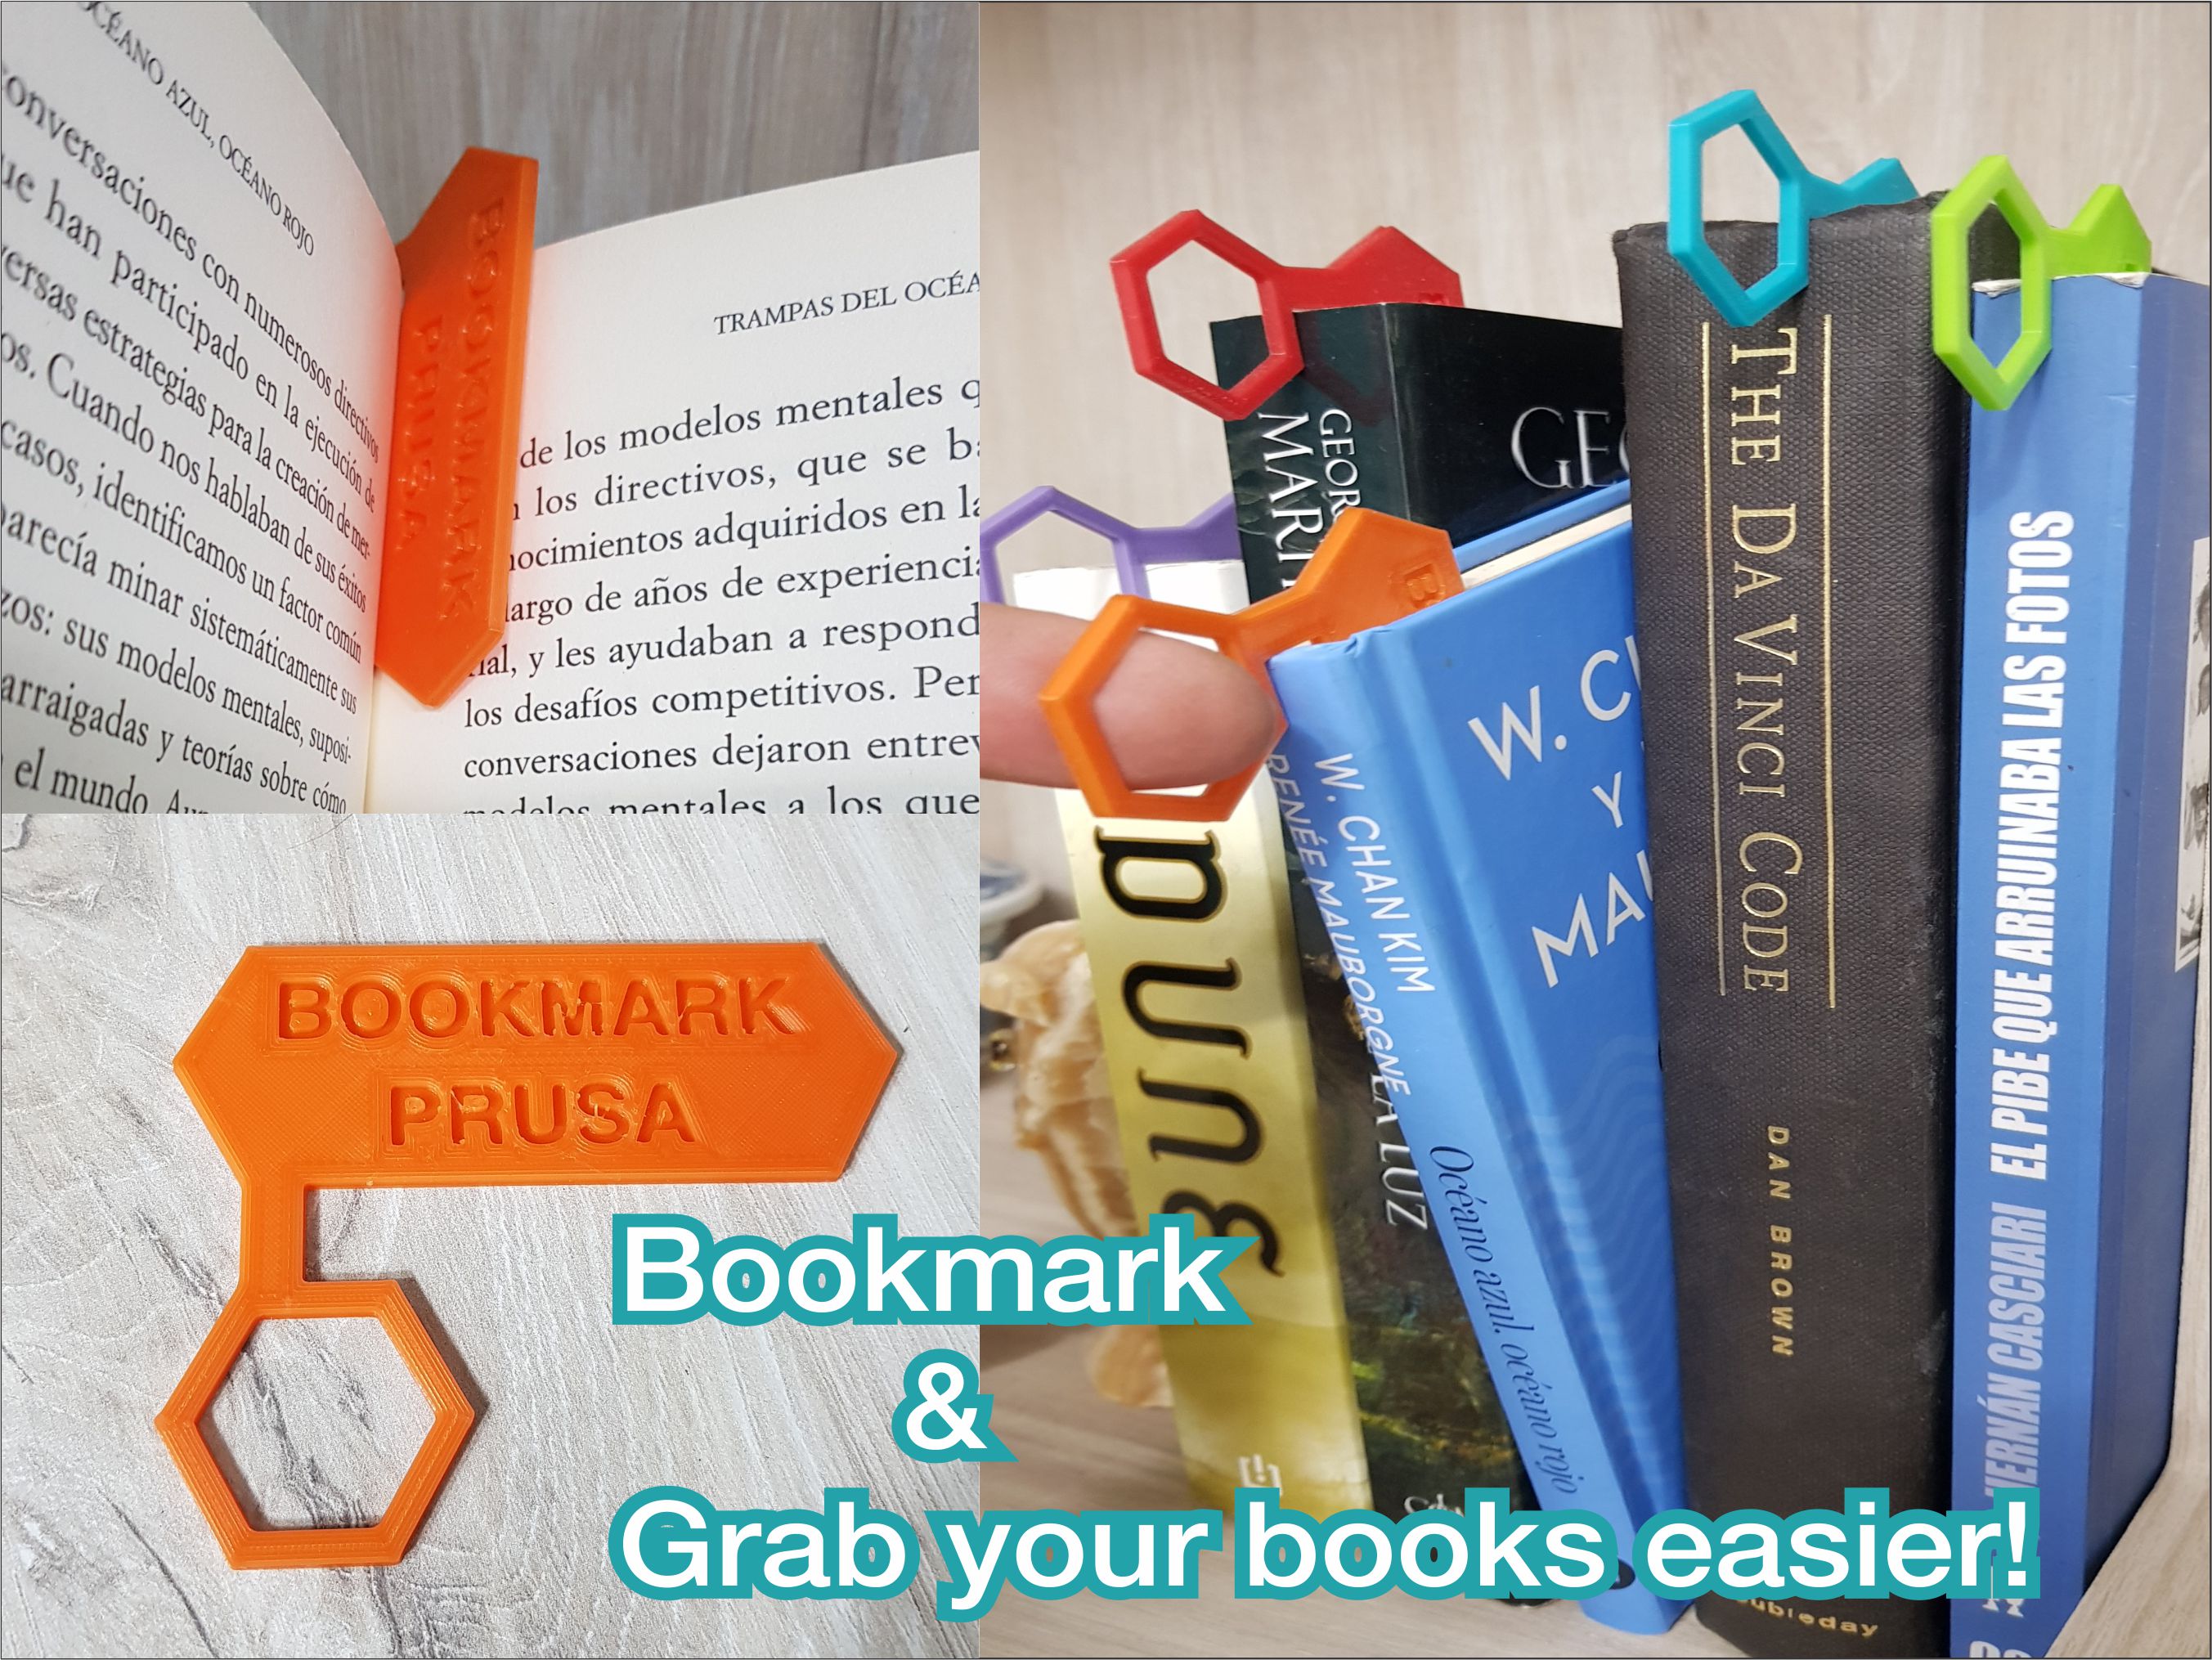 Bookmark & Grab your books easier!